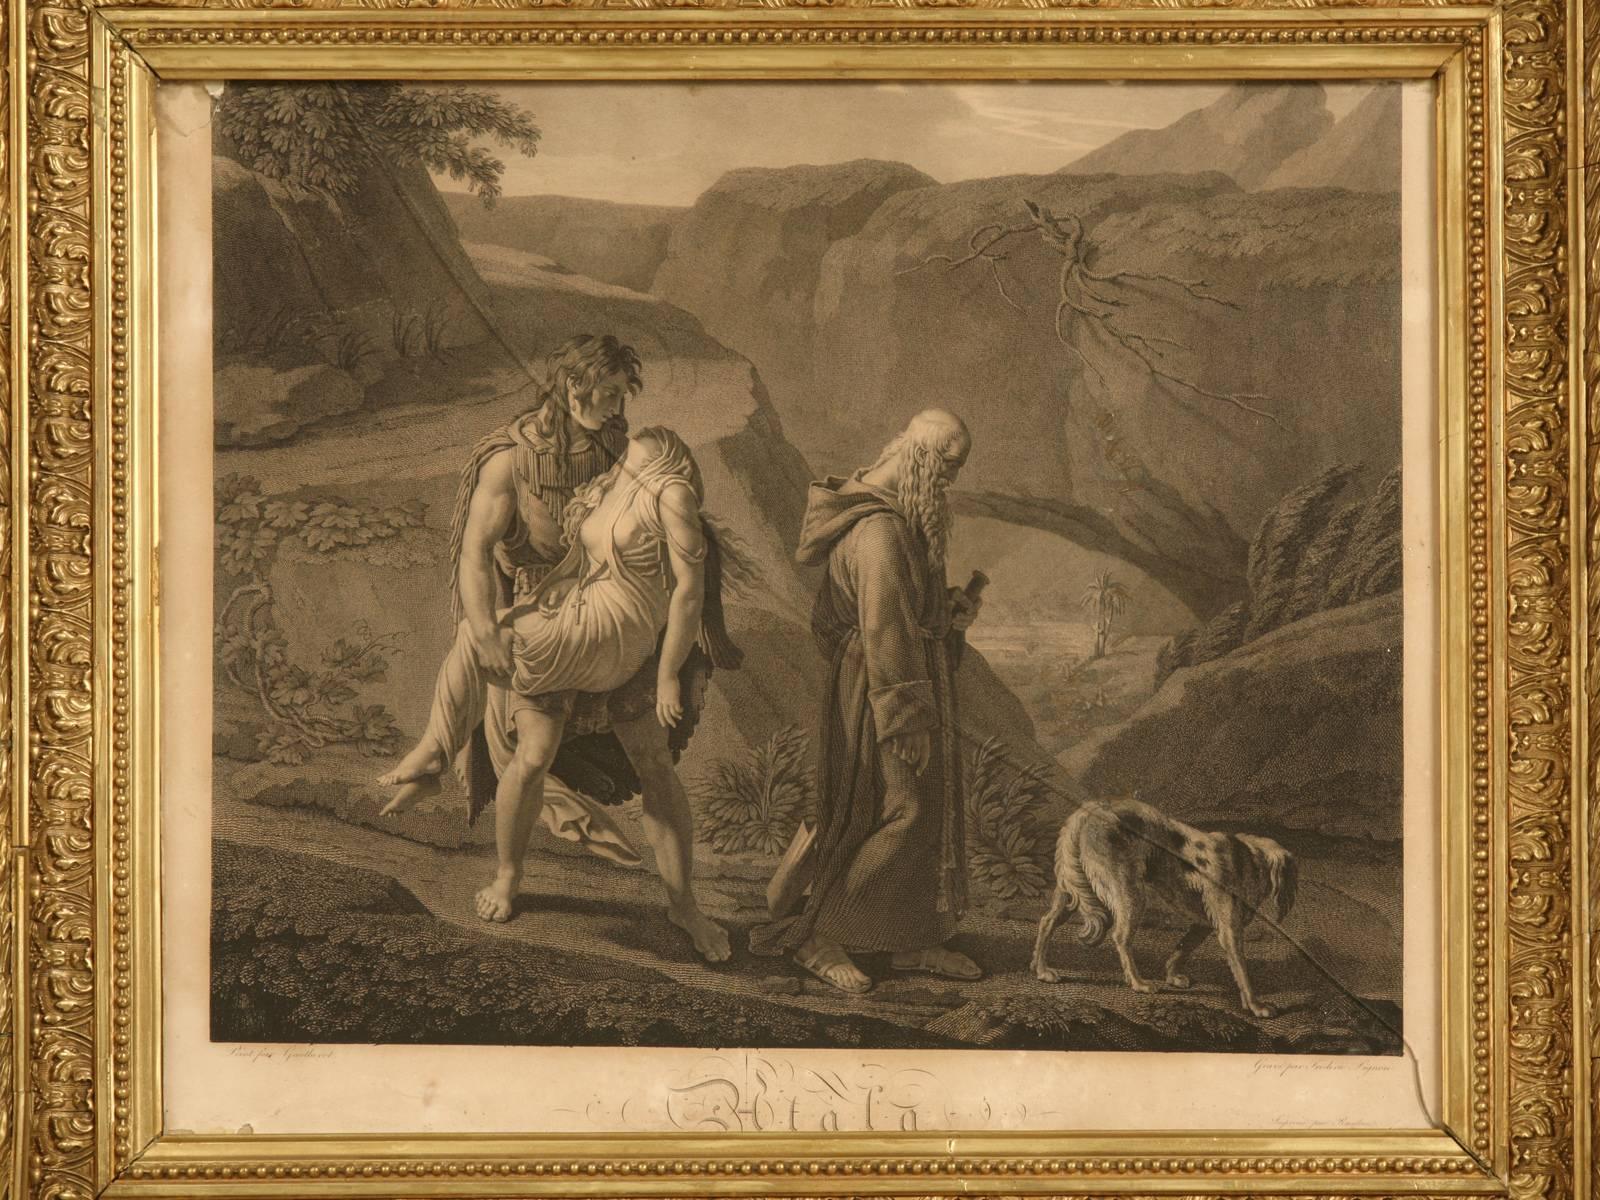 Il seppellimento di atala, da gautherot (the burial of atala, by Gautherot).
Atala, a Christian, fell in love with Chactas and saved him from death that he was to undergo as a prisoner. She then fled with him into the deserts of Florida, where they